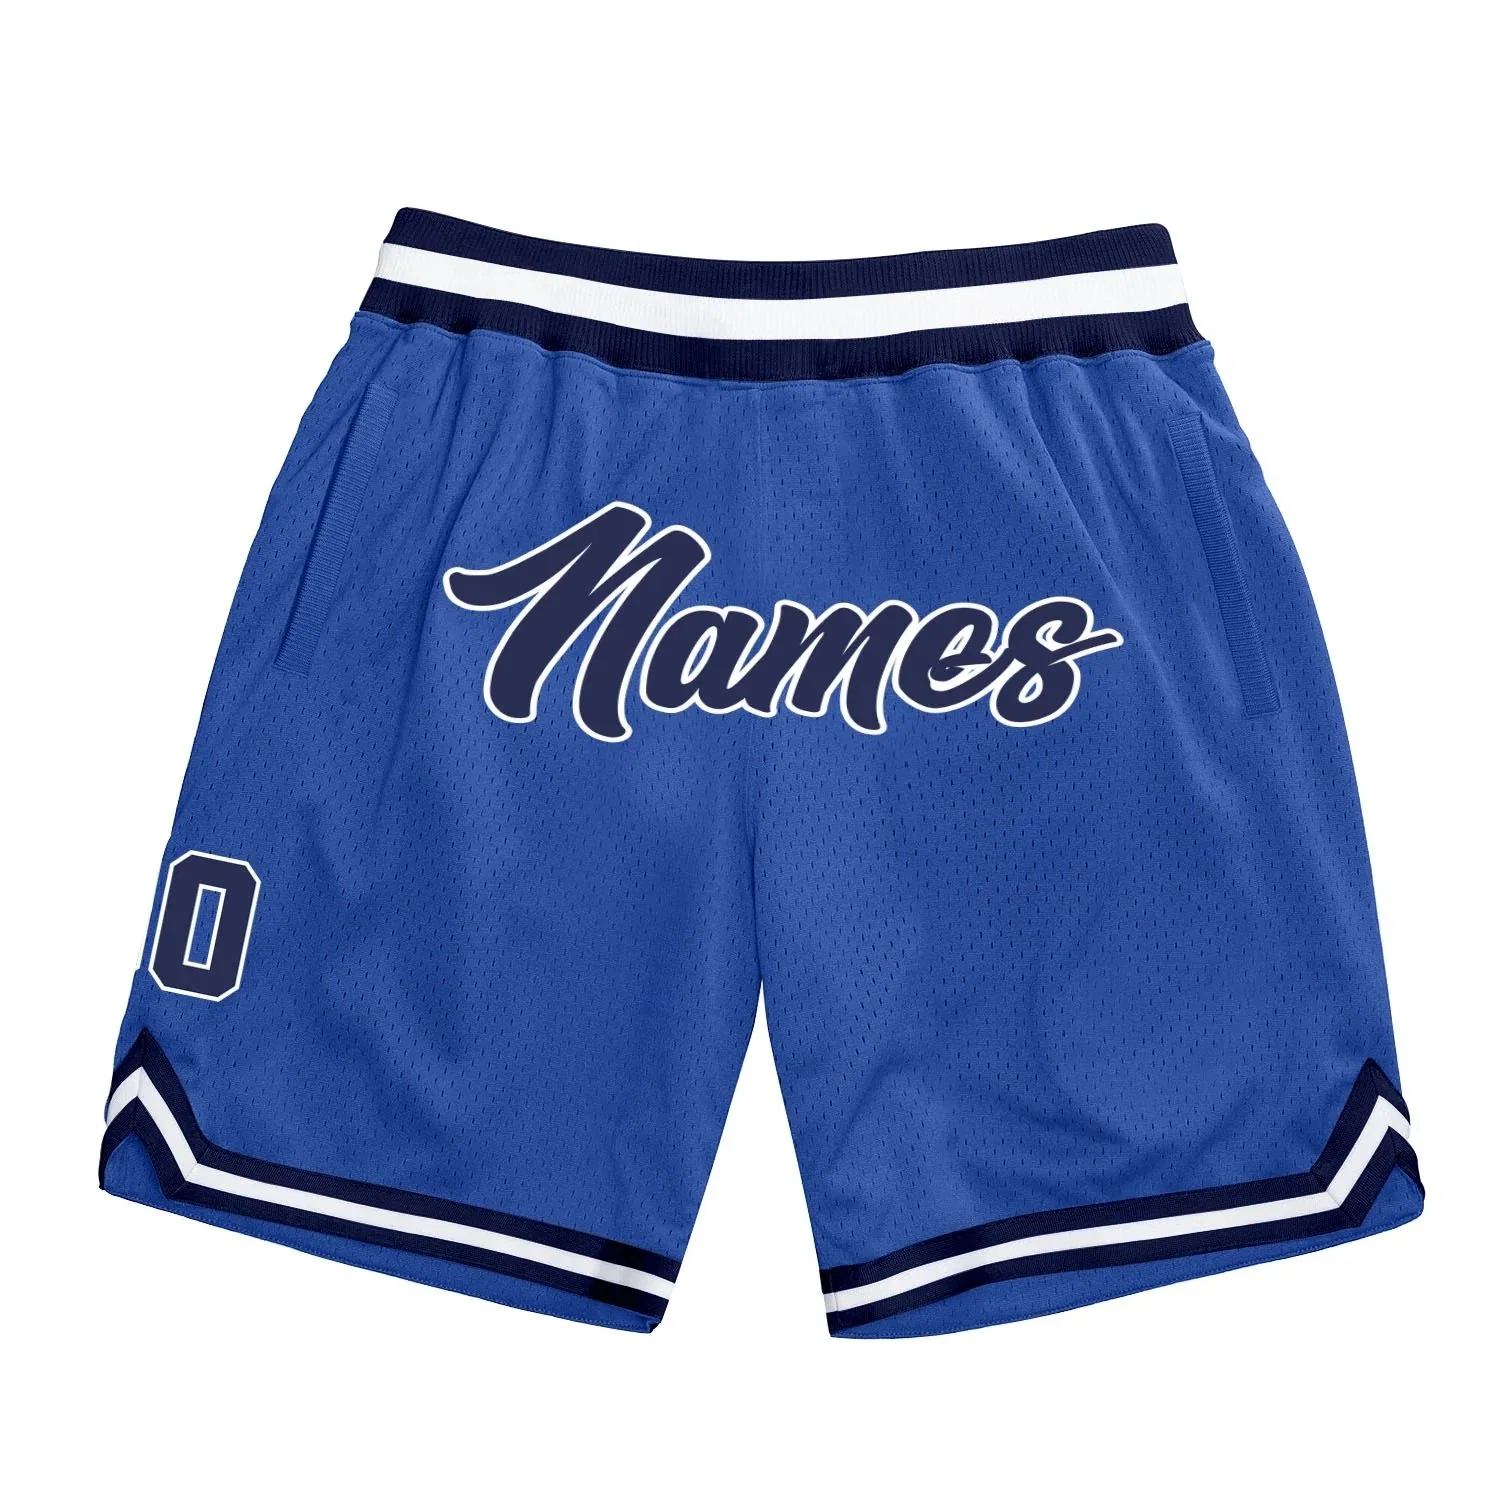 Custom Wholesale Blue Basketball Sport Shorts Fans Quick Dry Retro Mesh Embroidered Fans Custom Print Trunks Workout Gym Athletic Casual Short